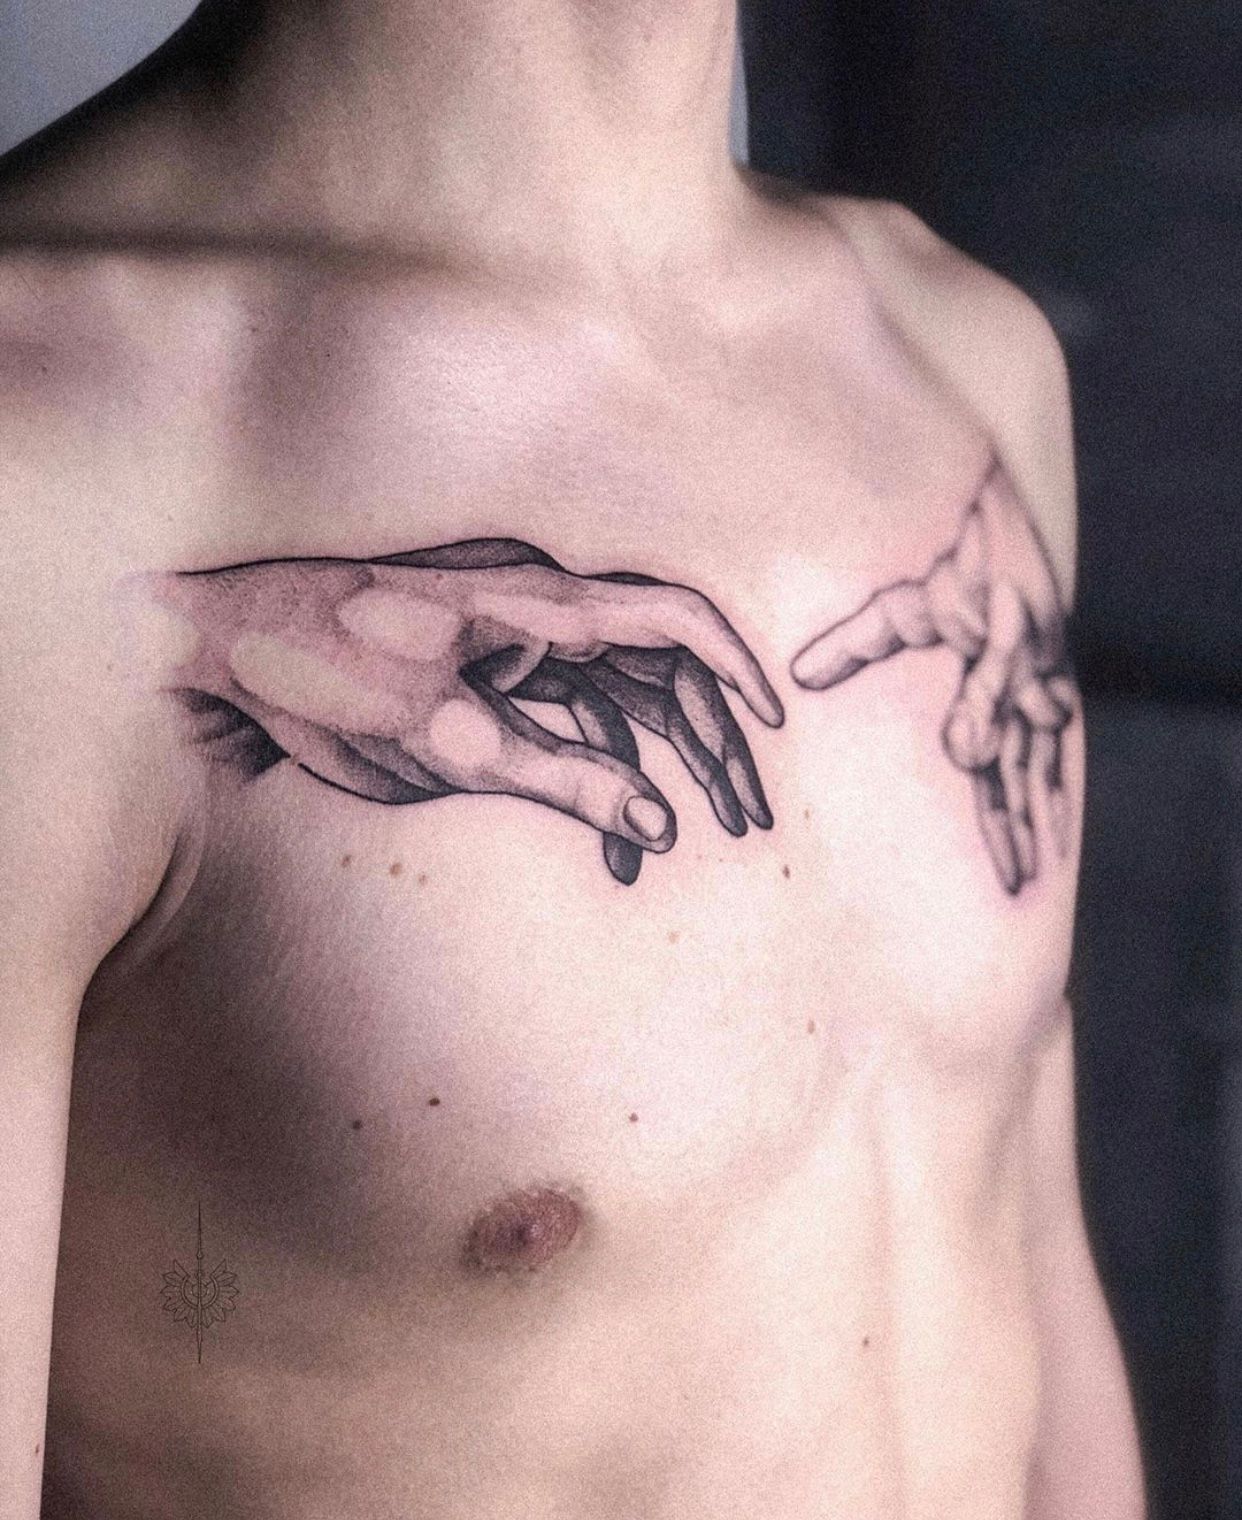 15 Best Chest Tattoo Designs for Men and Women